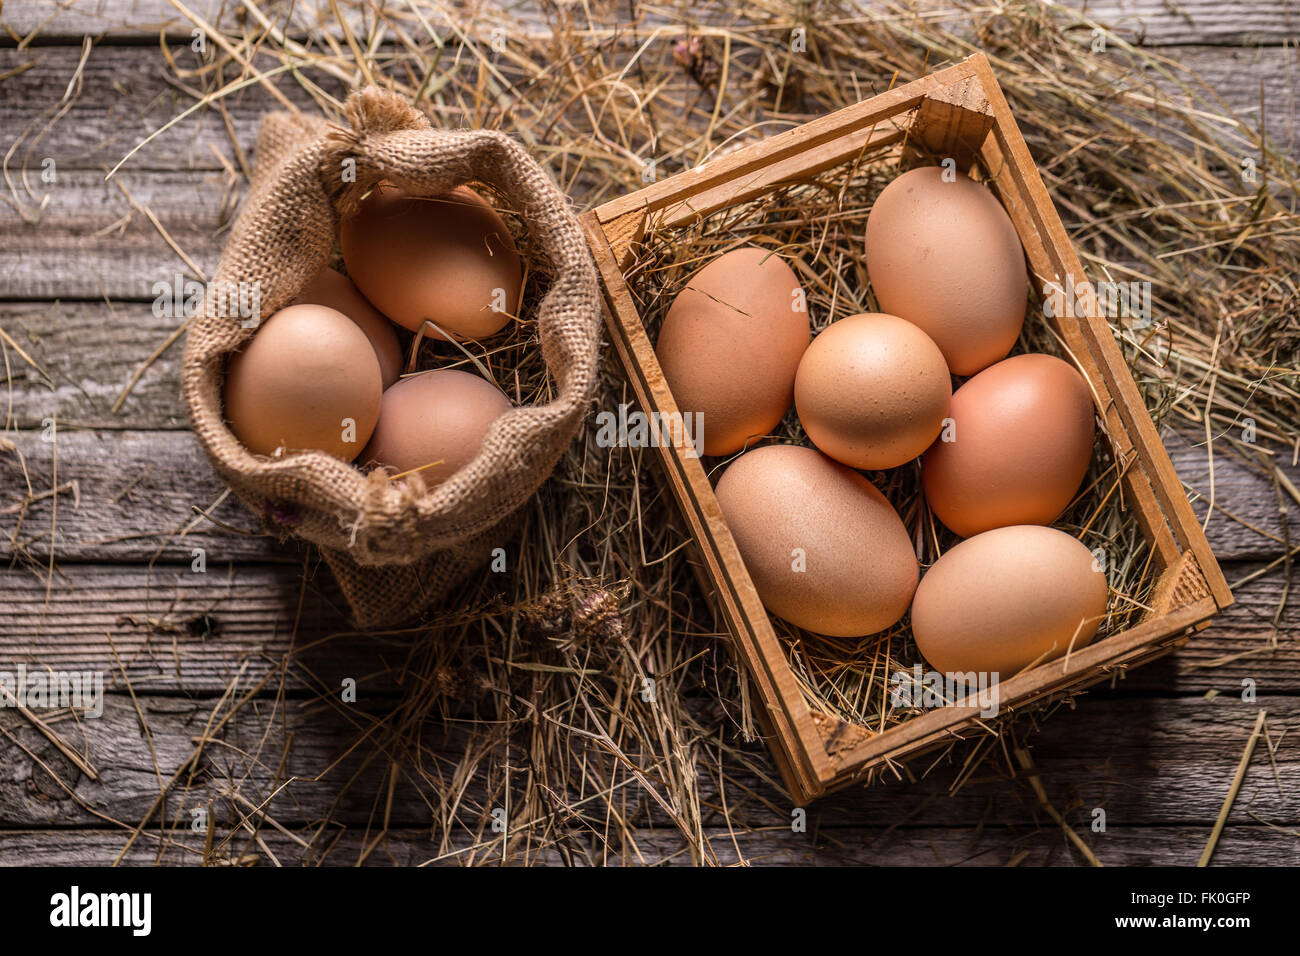 Bunch of fresh brown eggs in a wooden crate and in burlap sack Stock Photo